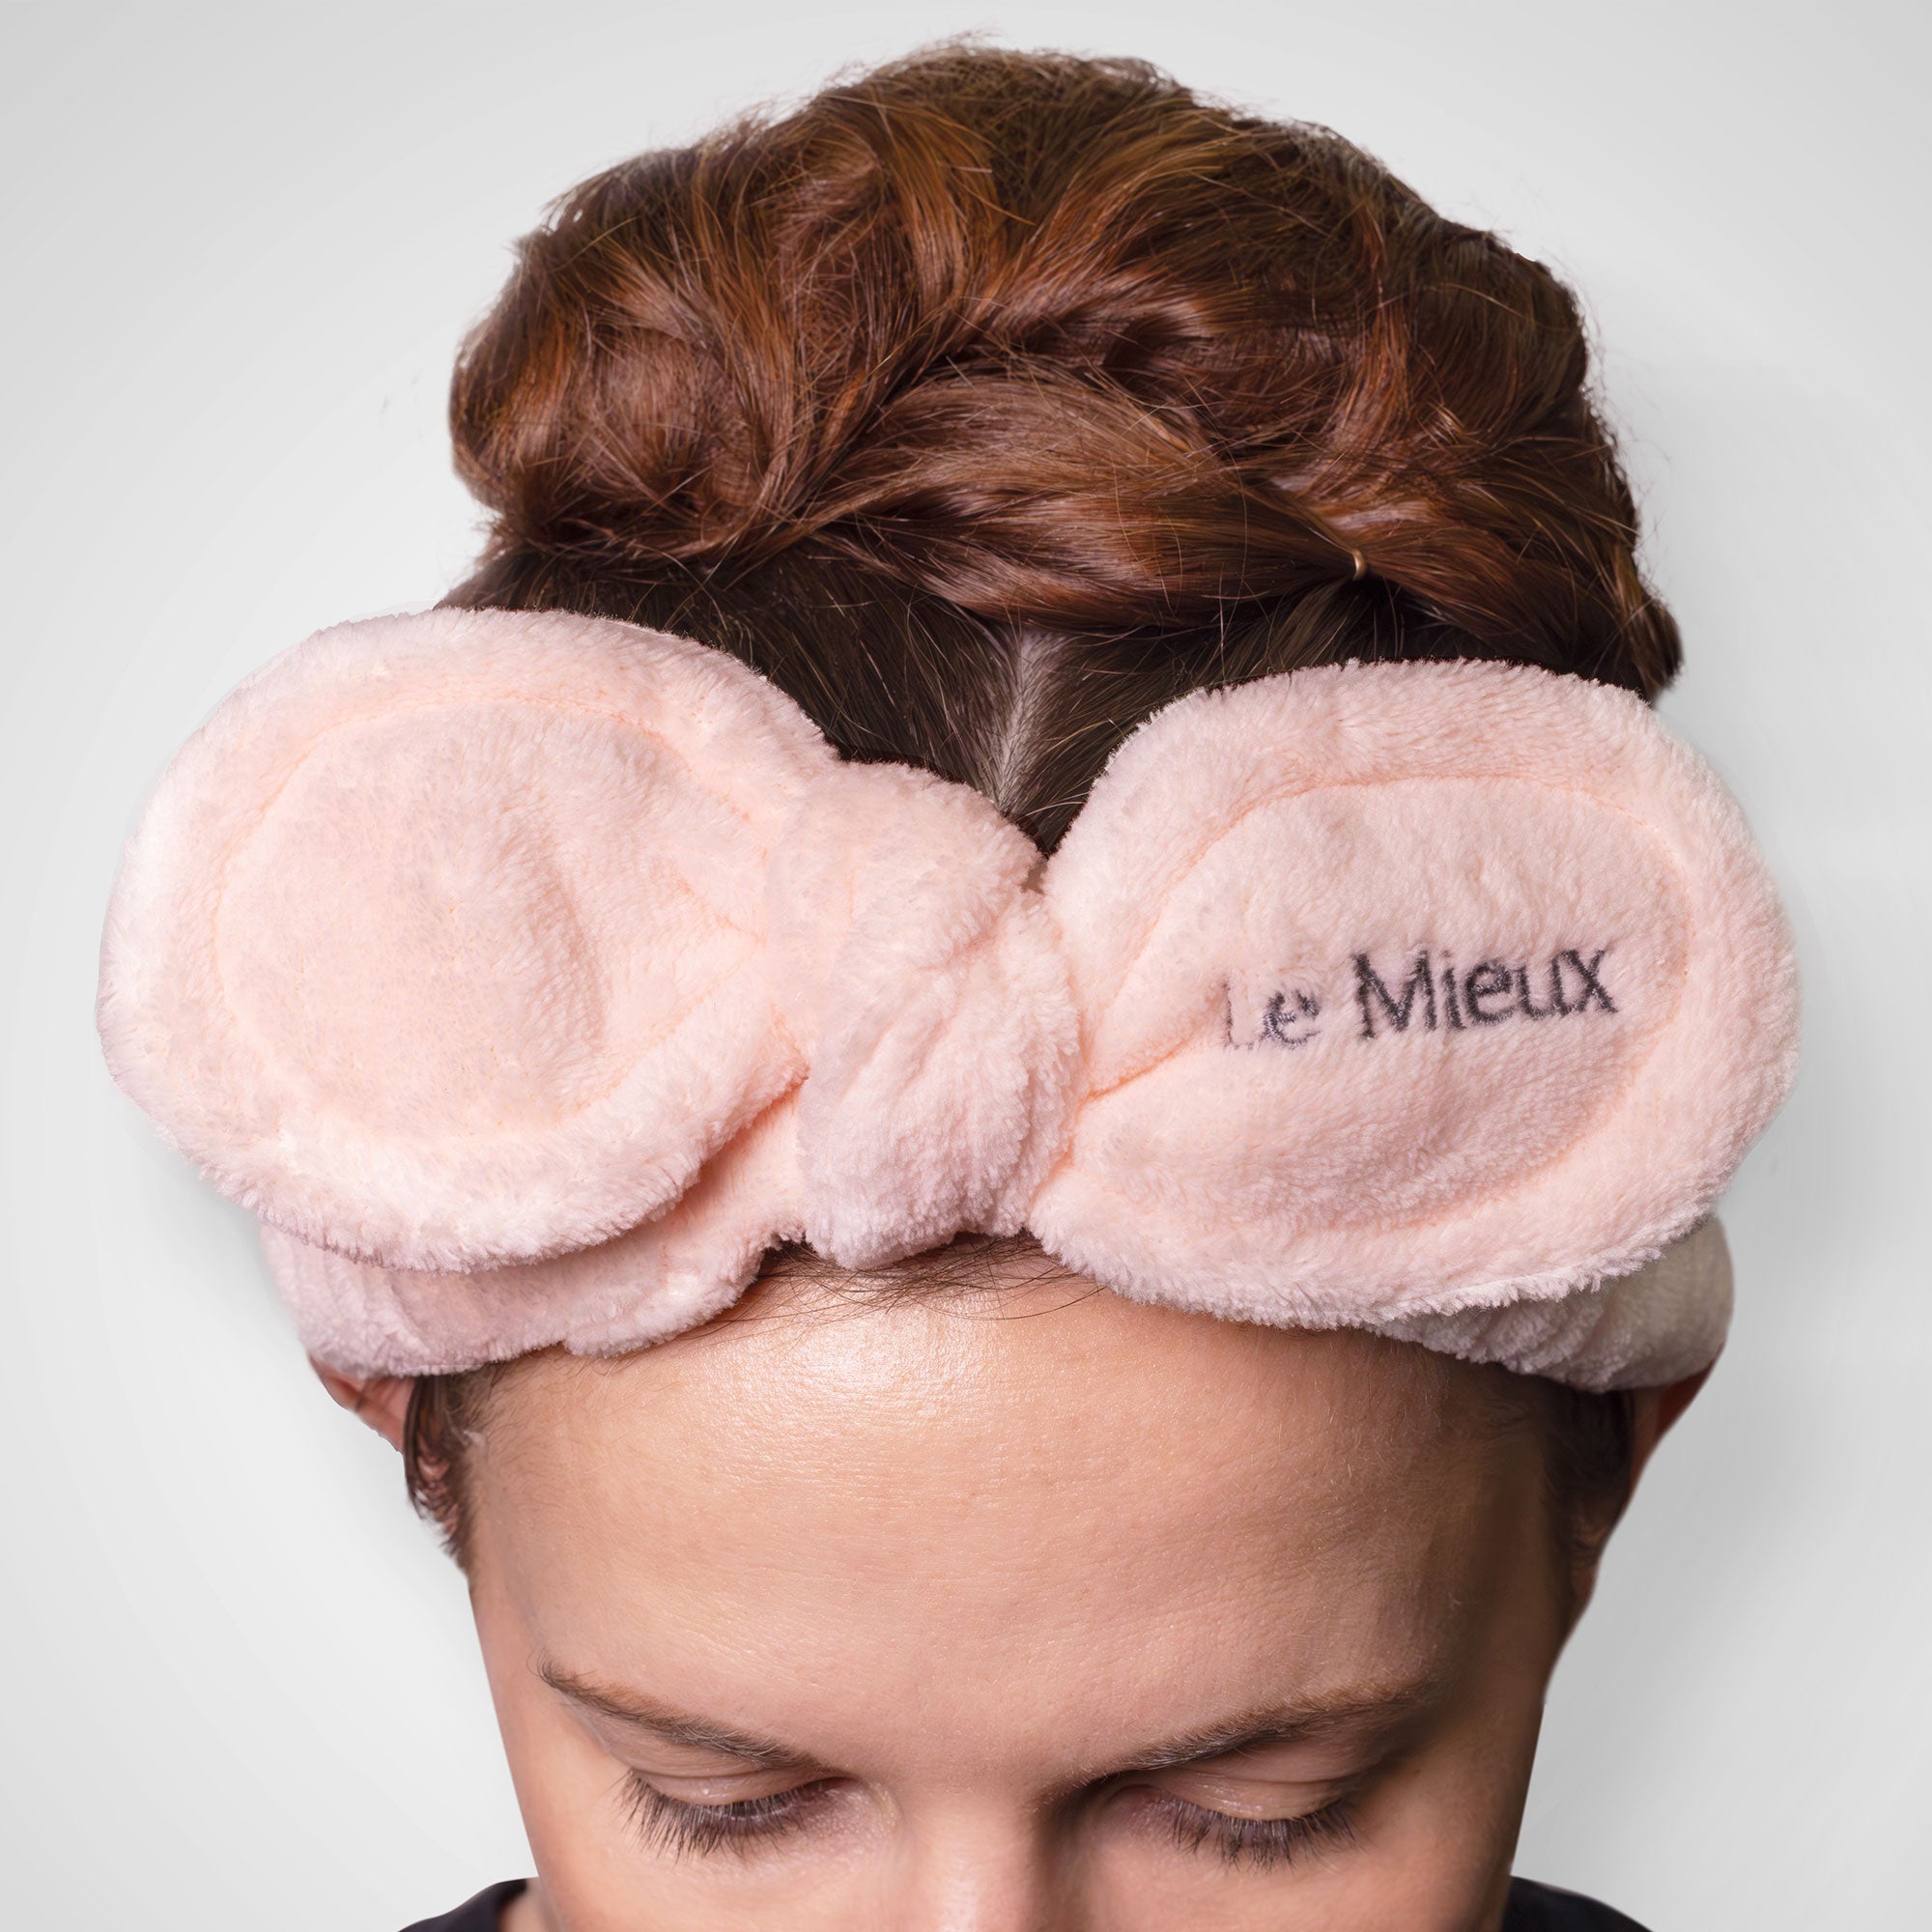  Headband from Le Mieux Skincare - 1